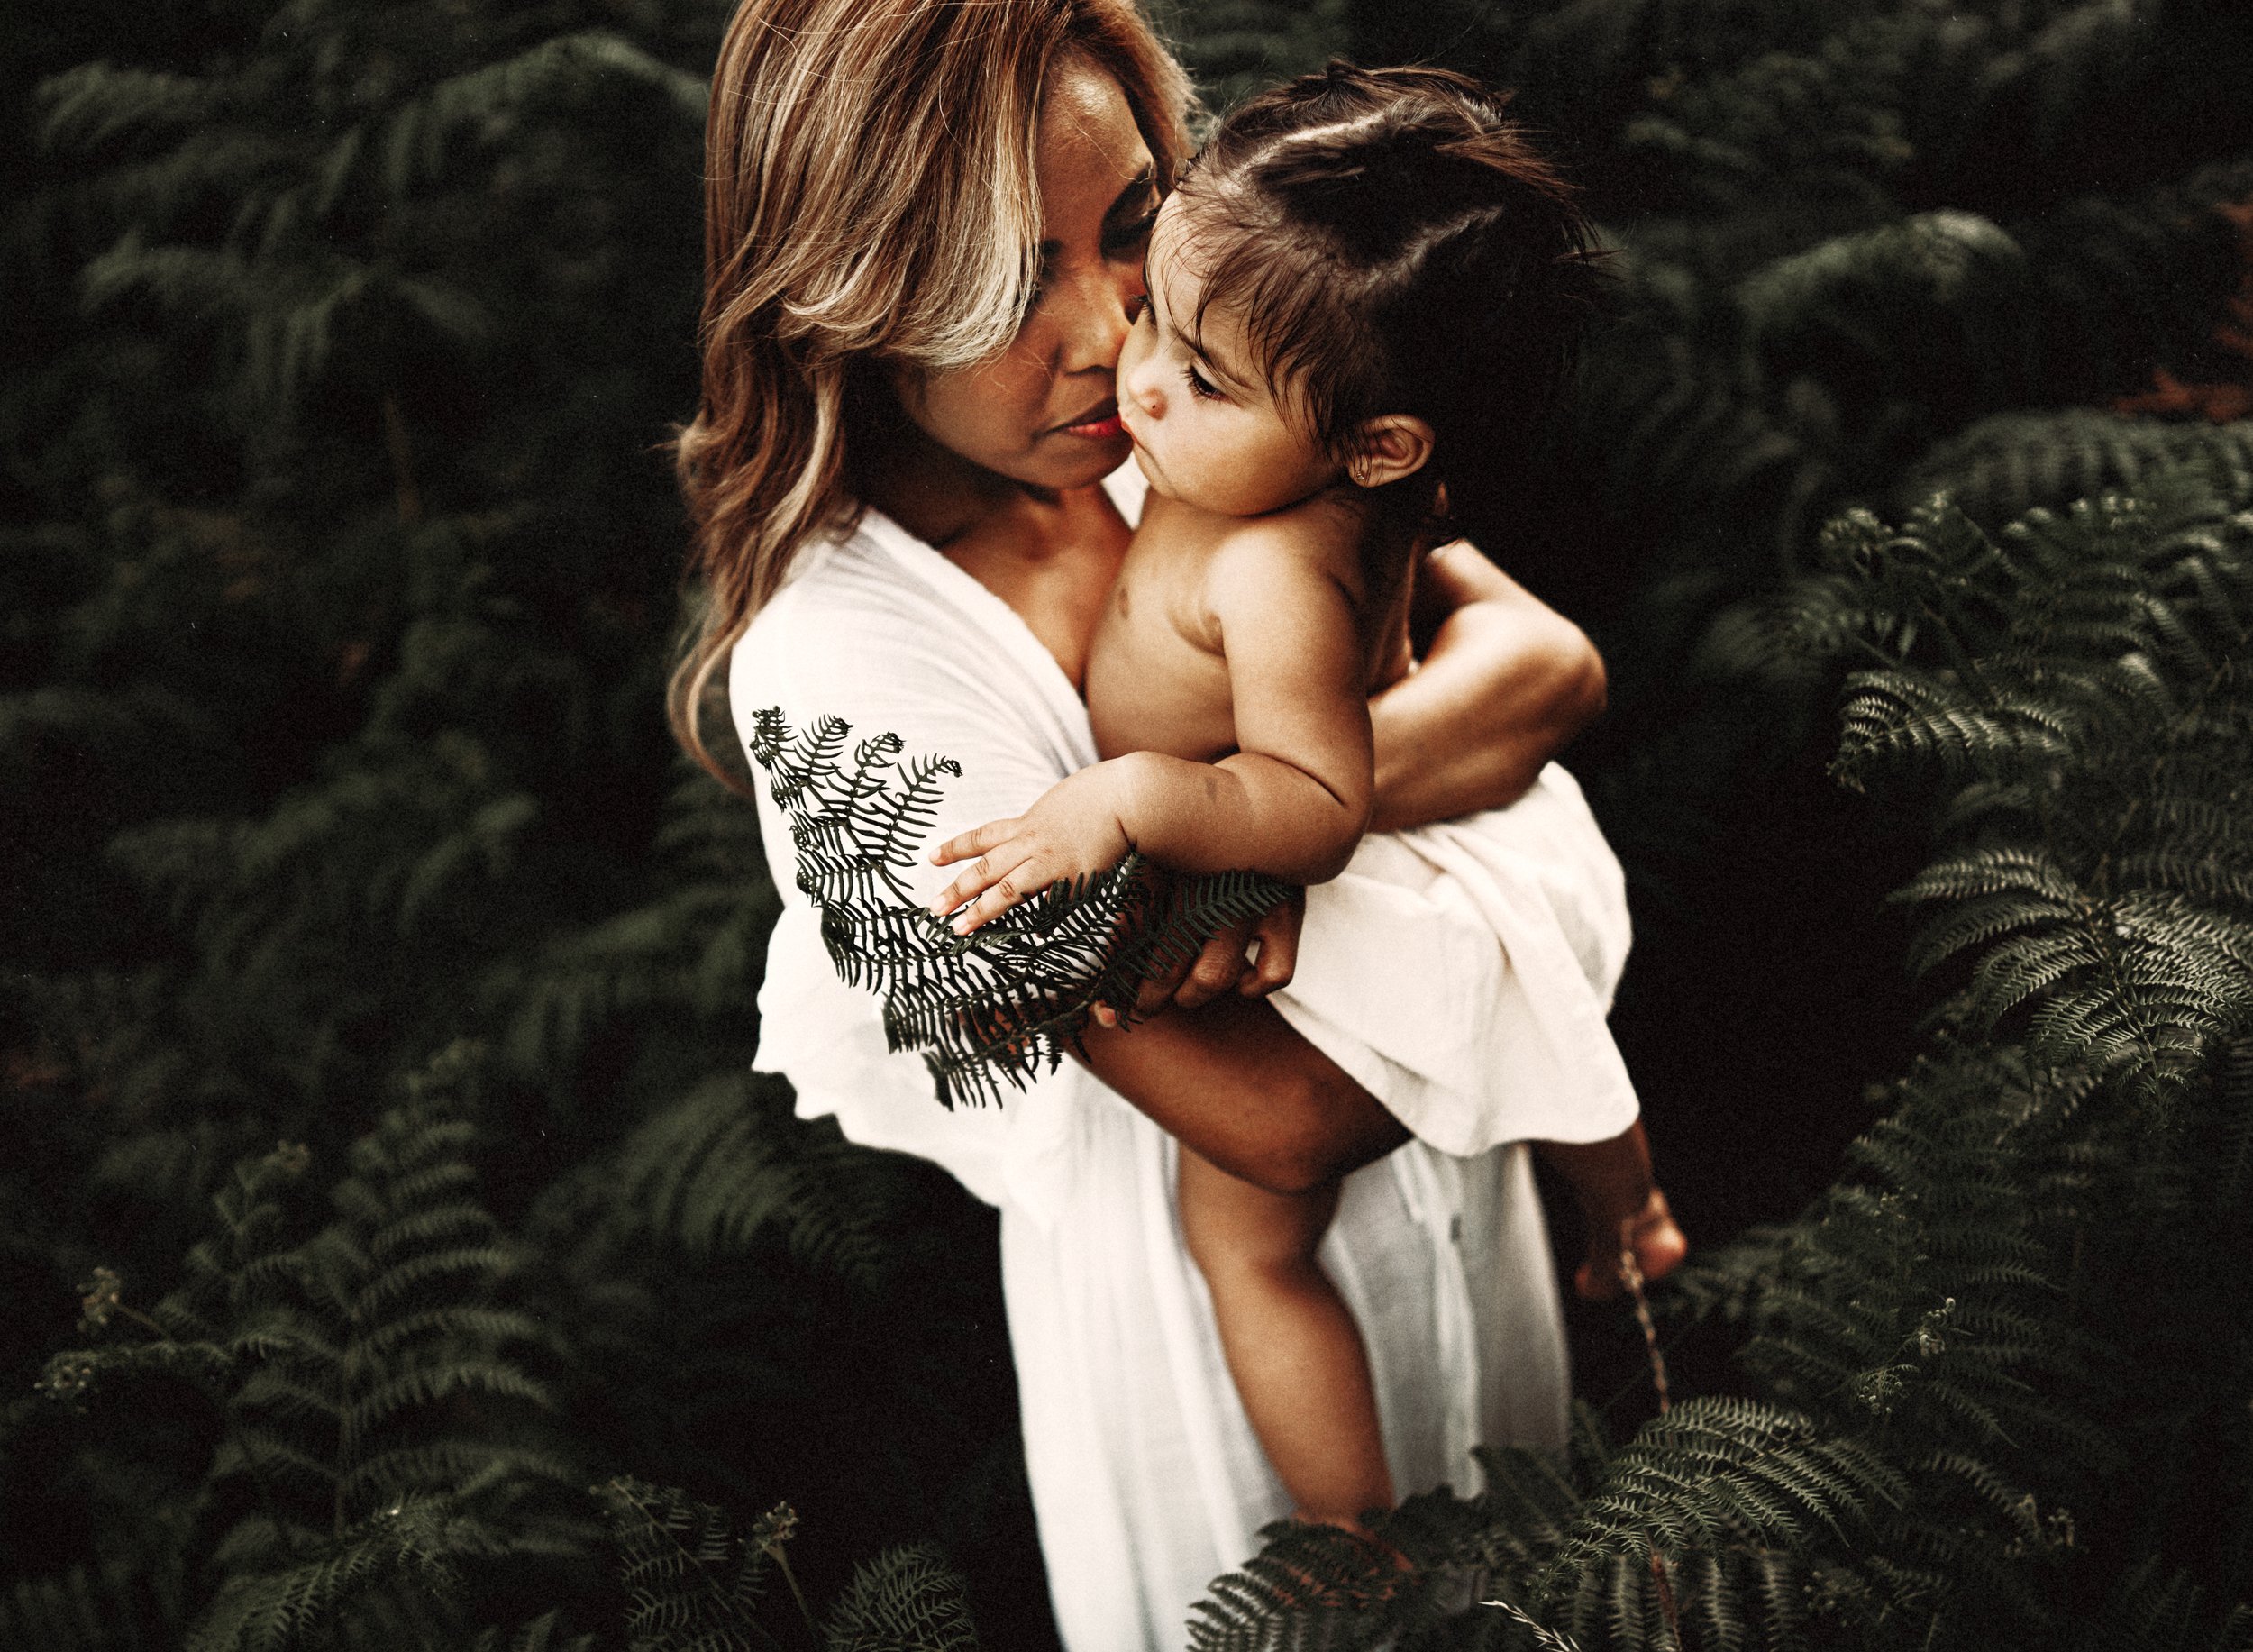 emotive-motherhood-photo-session-with-mother-and-daughter-in-a-patch-of-ferns-at-sunset-in-landtuhl-kmc-germany (4).jpg